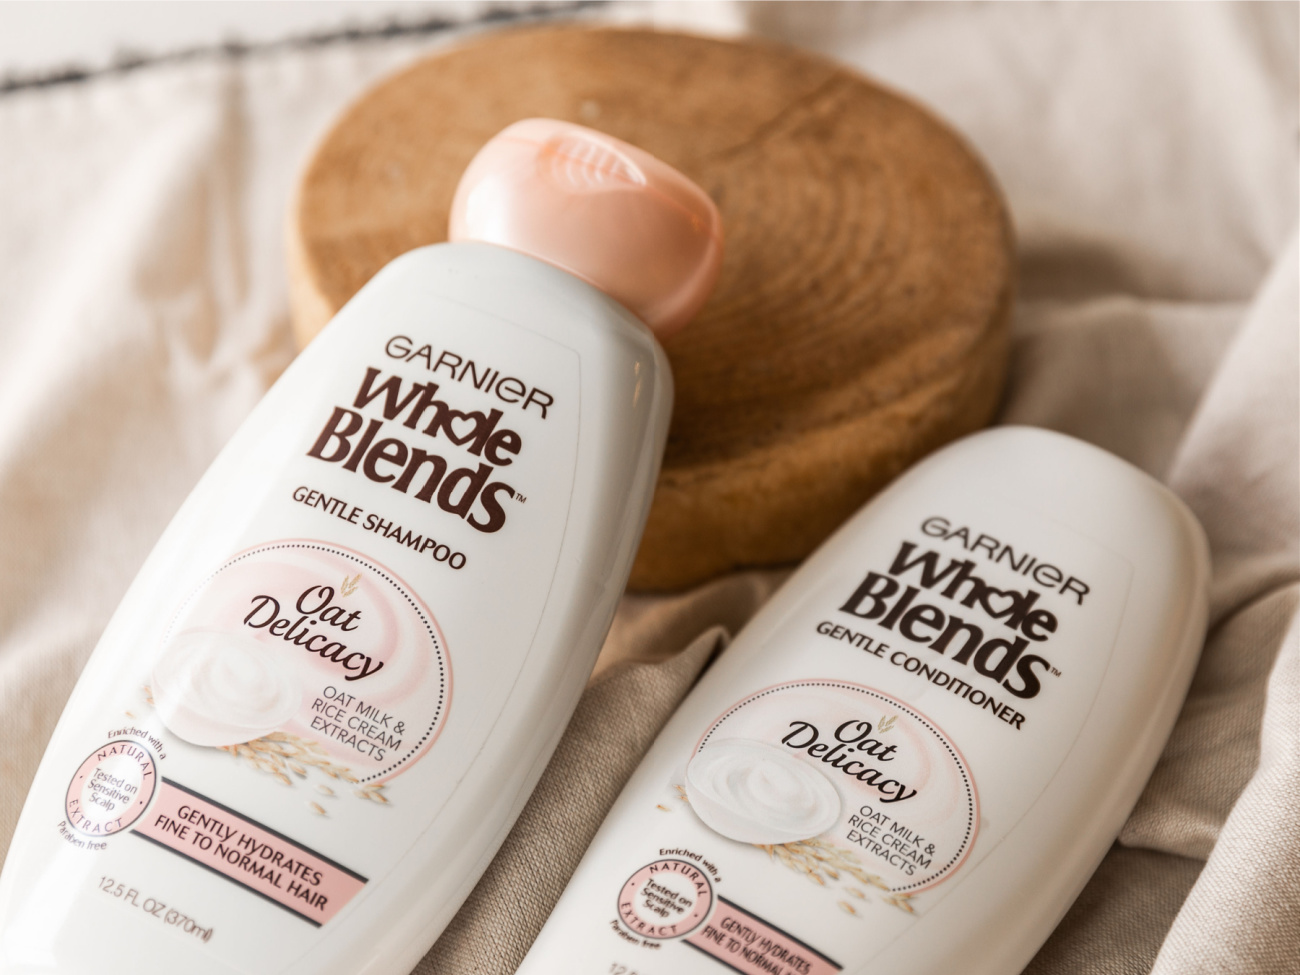 Garnier Whole Blends Haircare As Low As 99¢ At Kroger